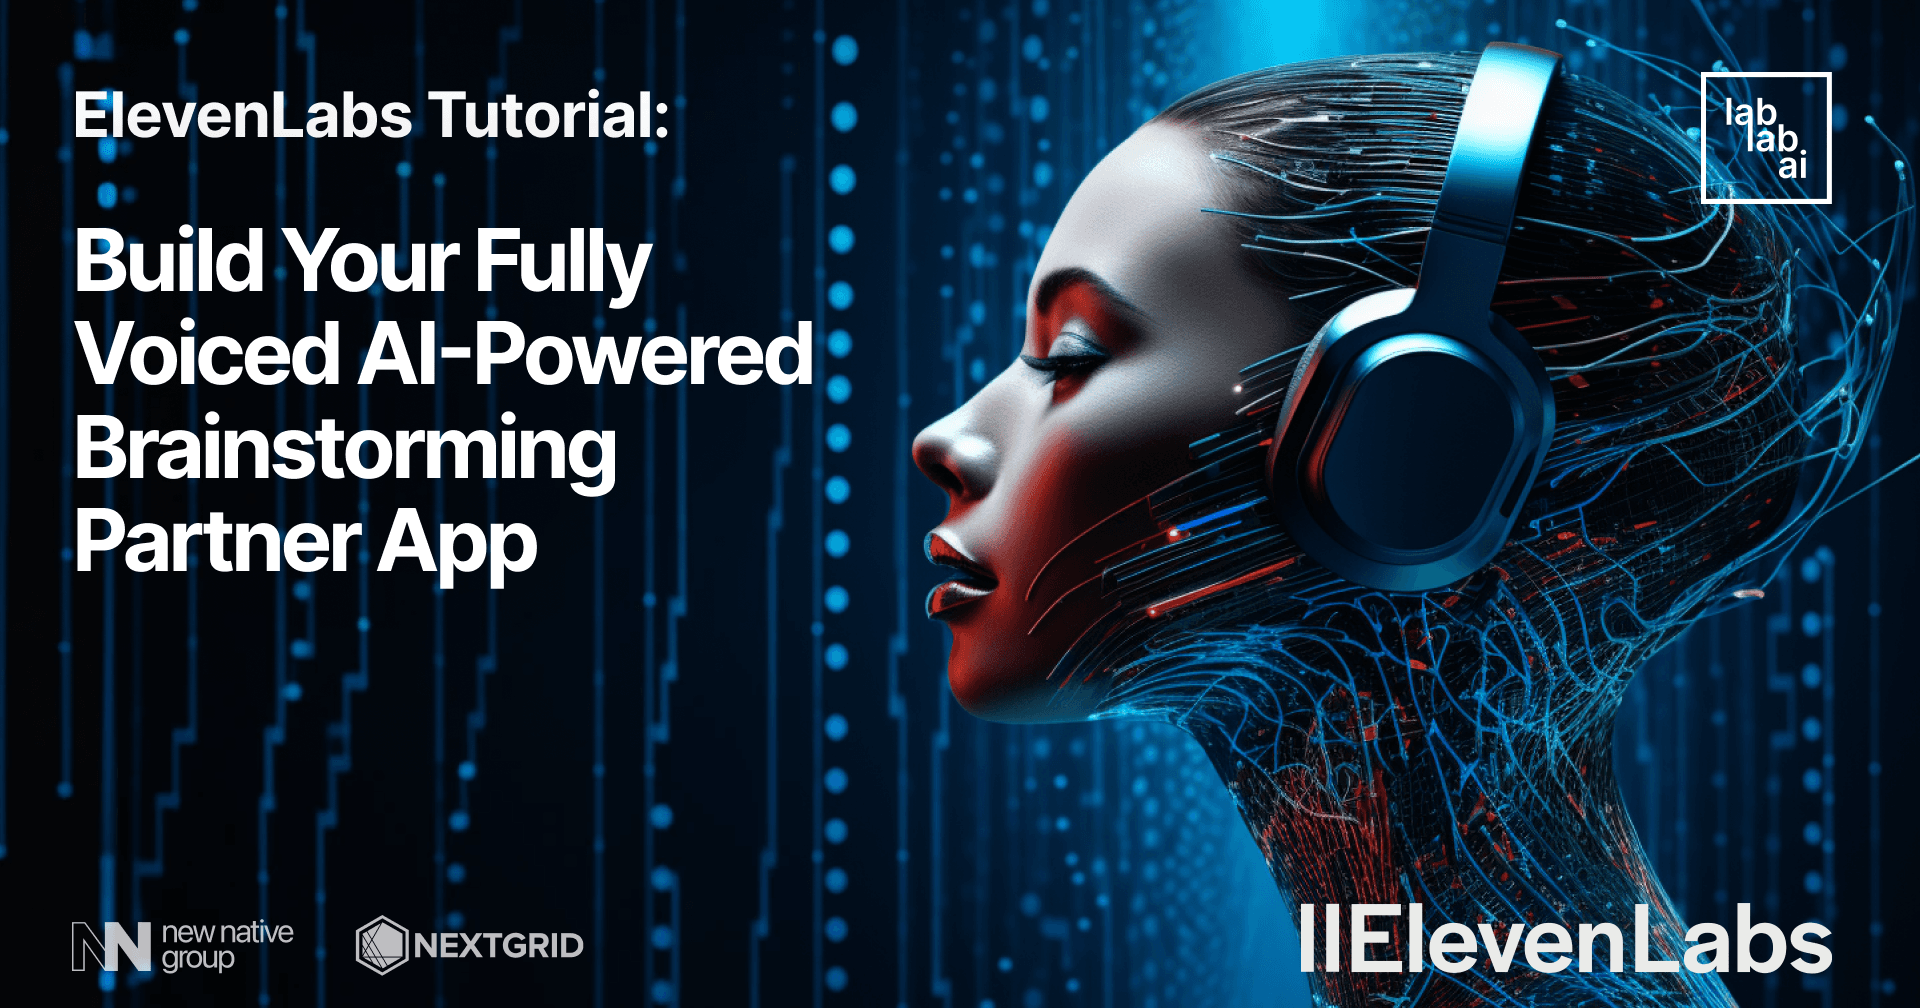 ElevenLabs Tutorial: Build Your Fully Voiced AI-Powered Brainstorming Partner App